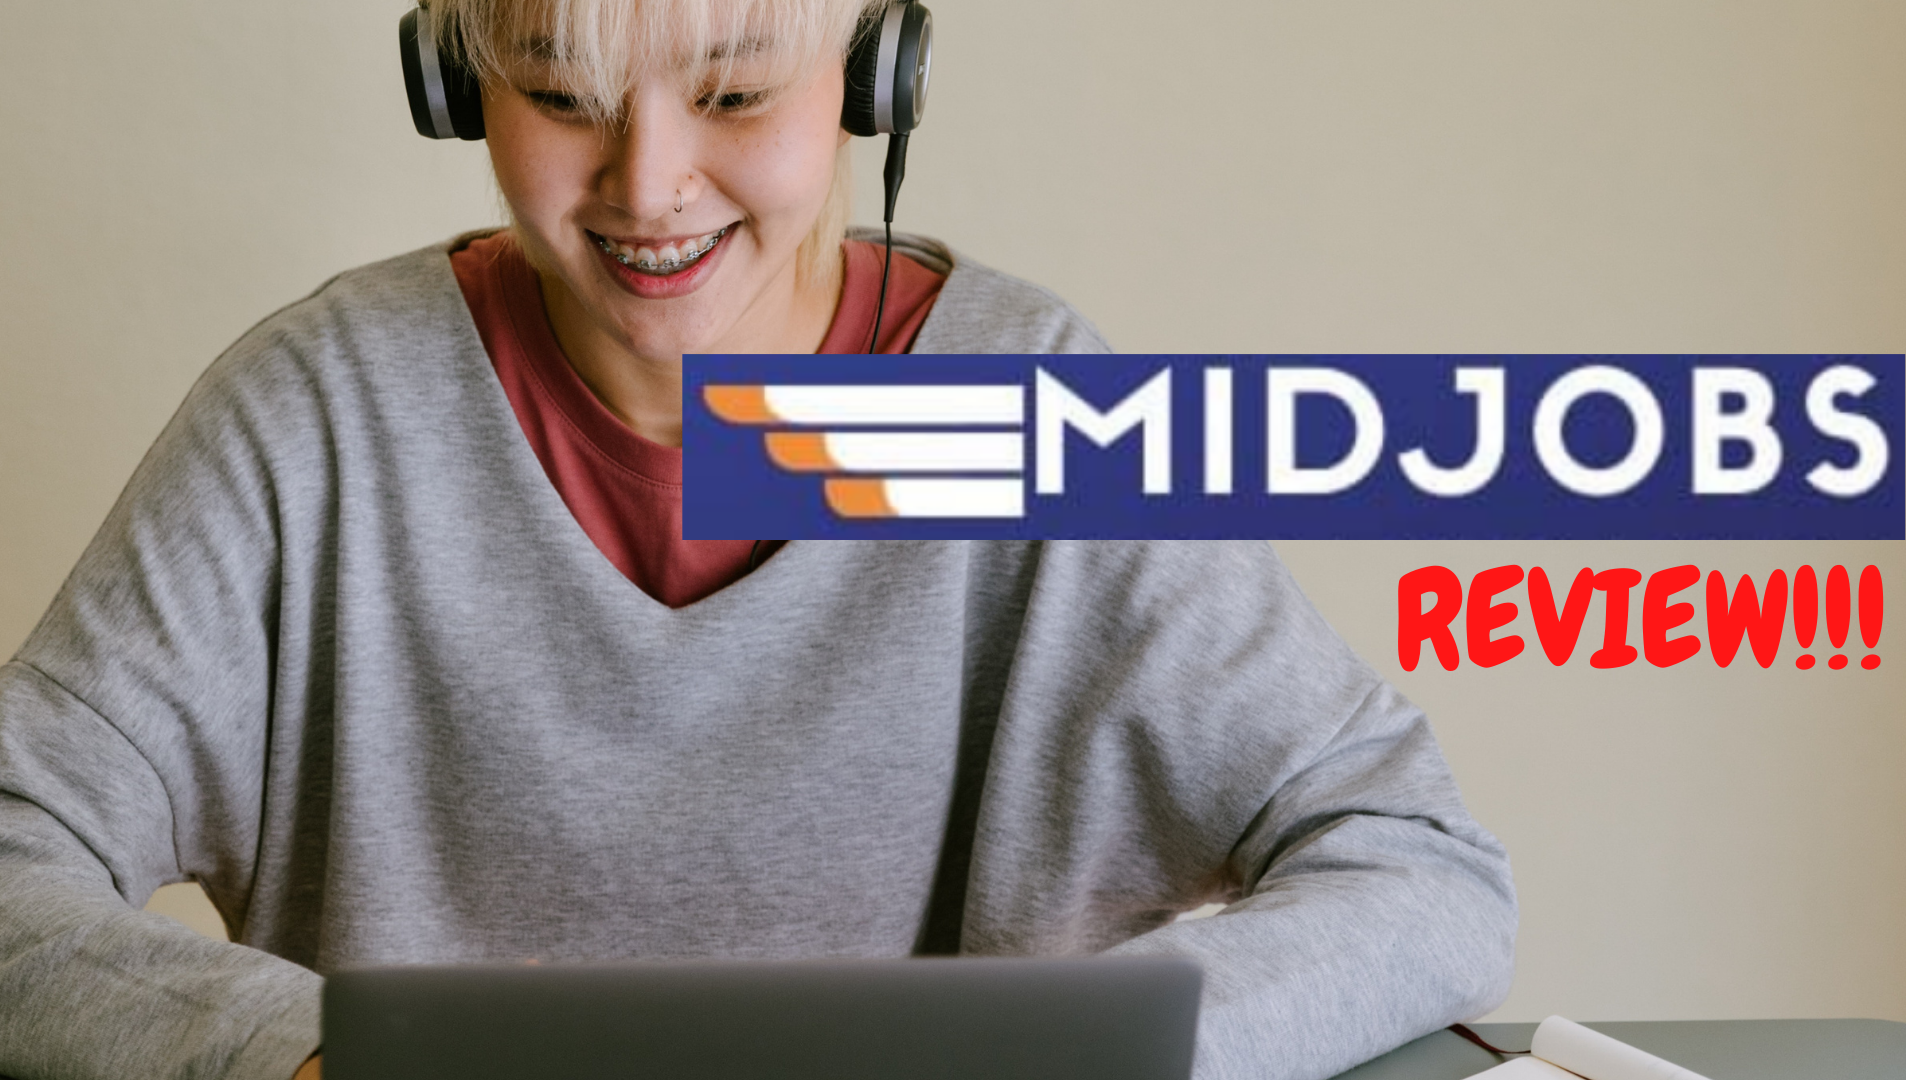 midjobs review